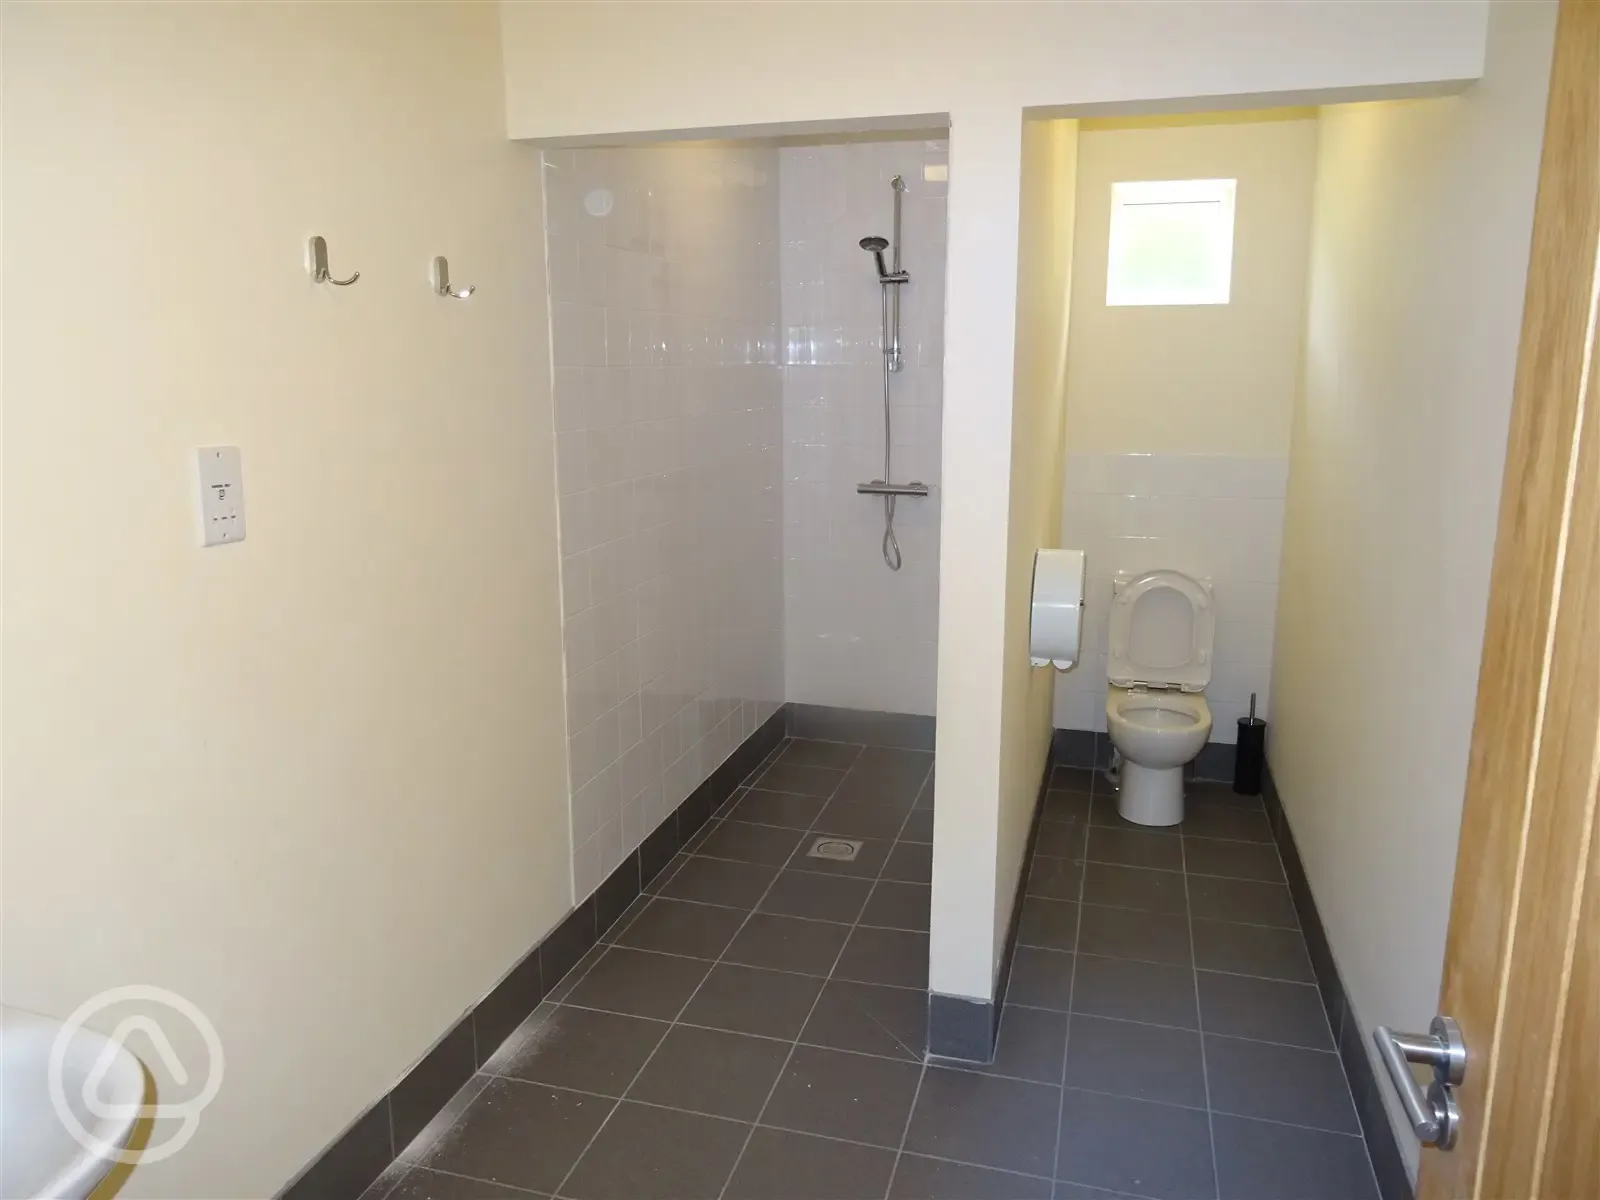 Toilet and Shower Suite No 1